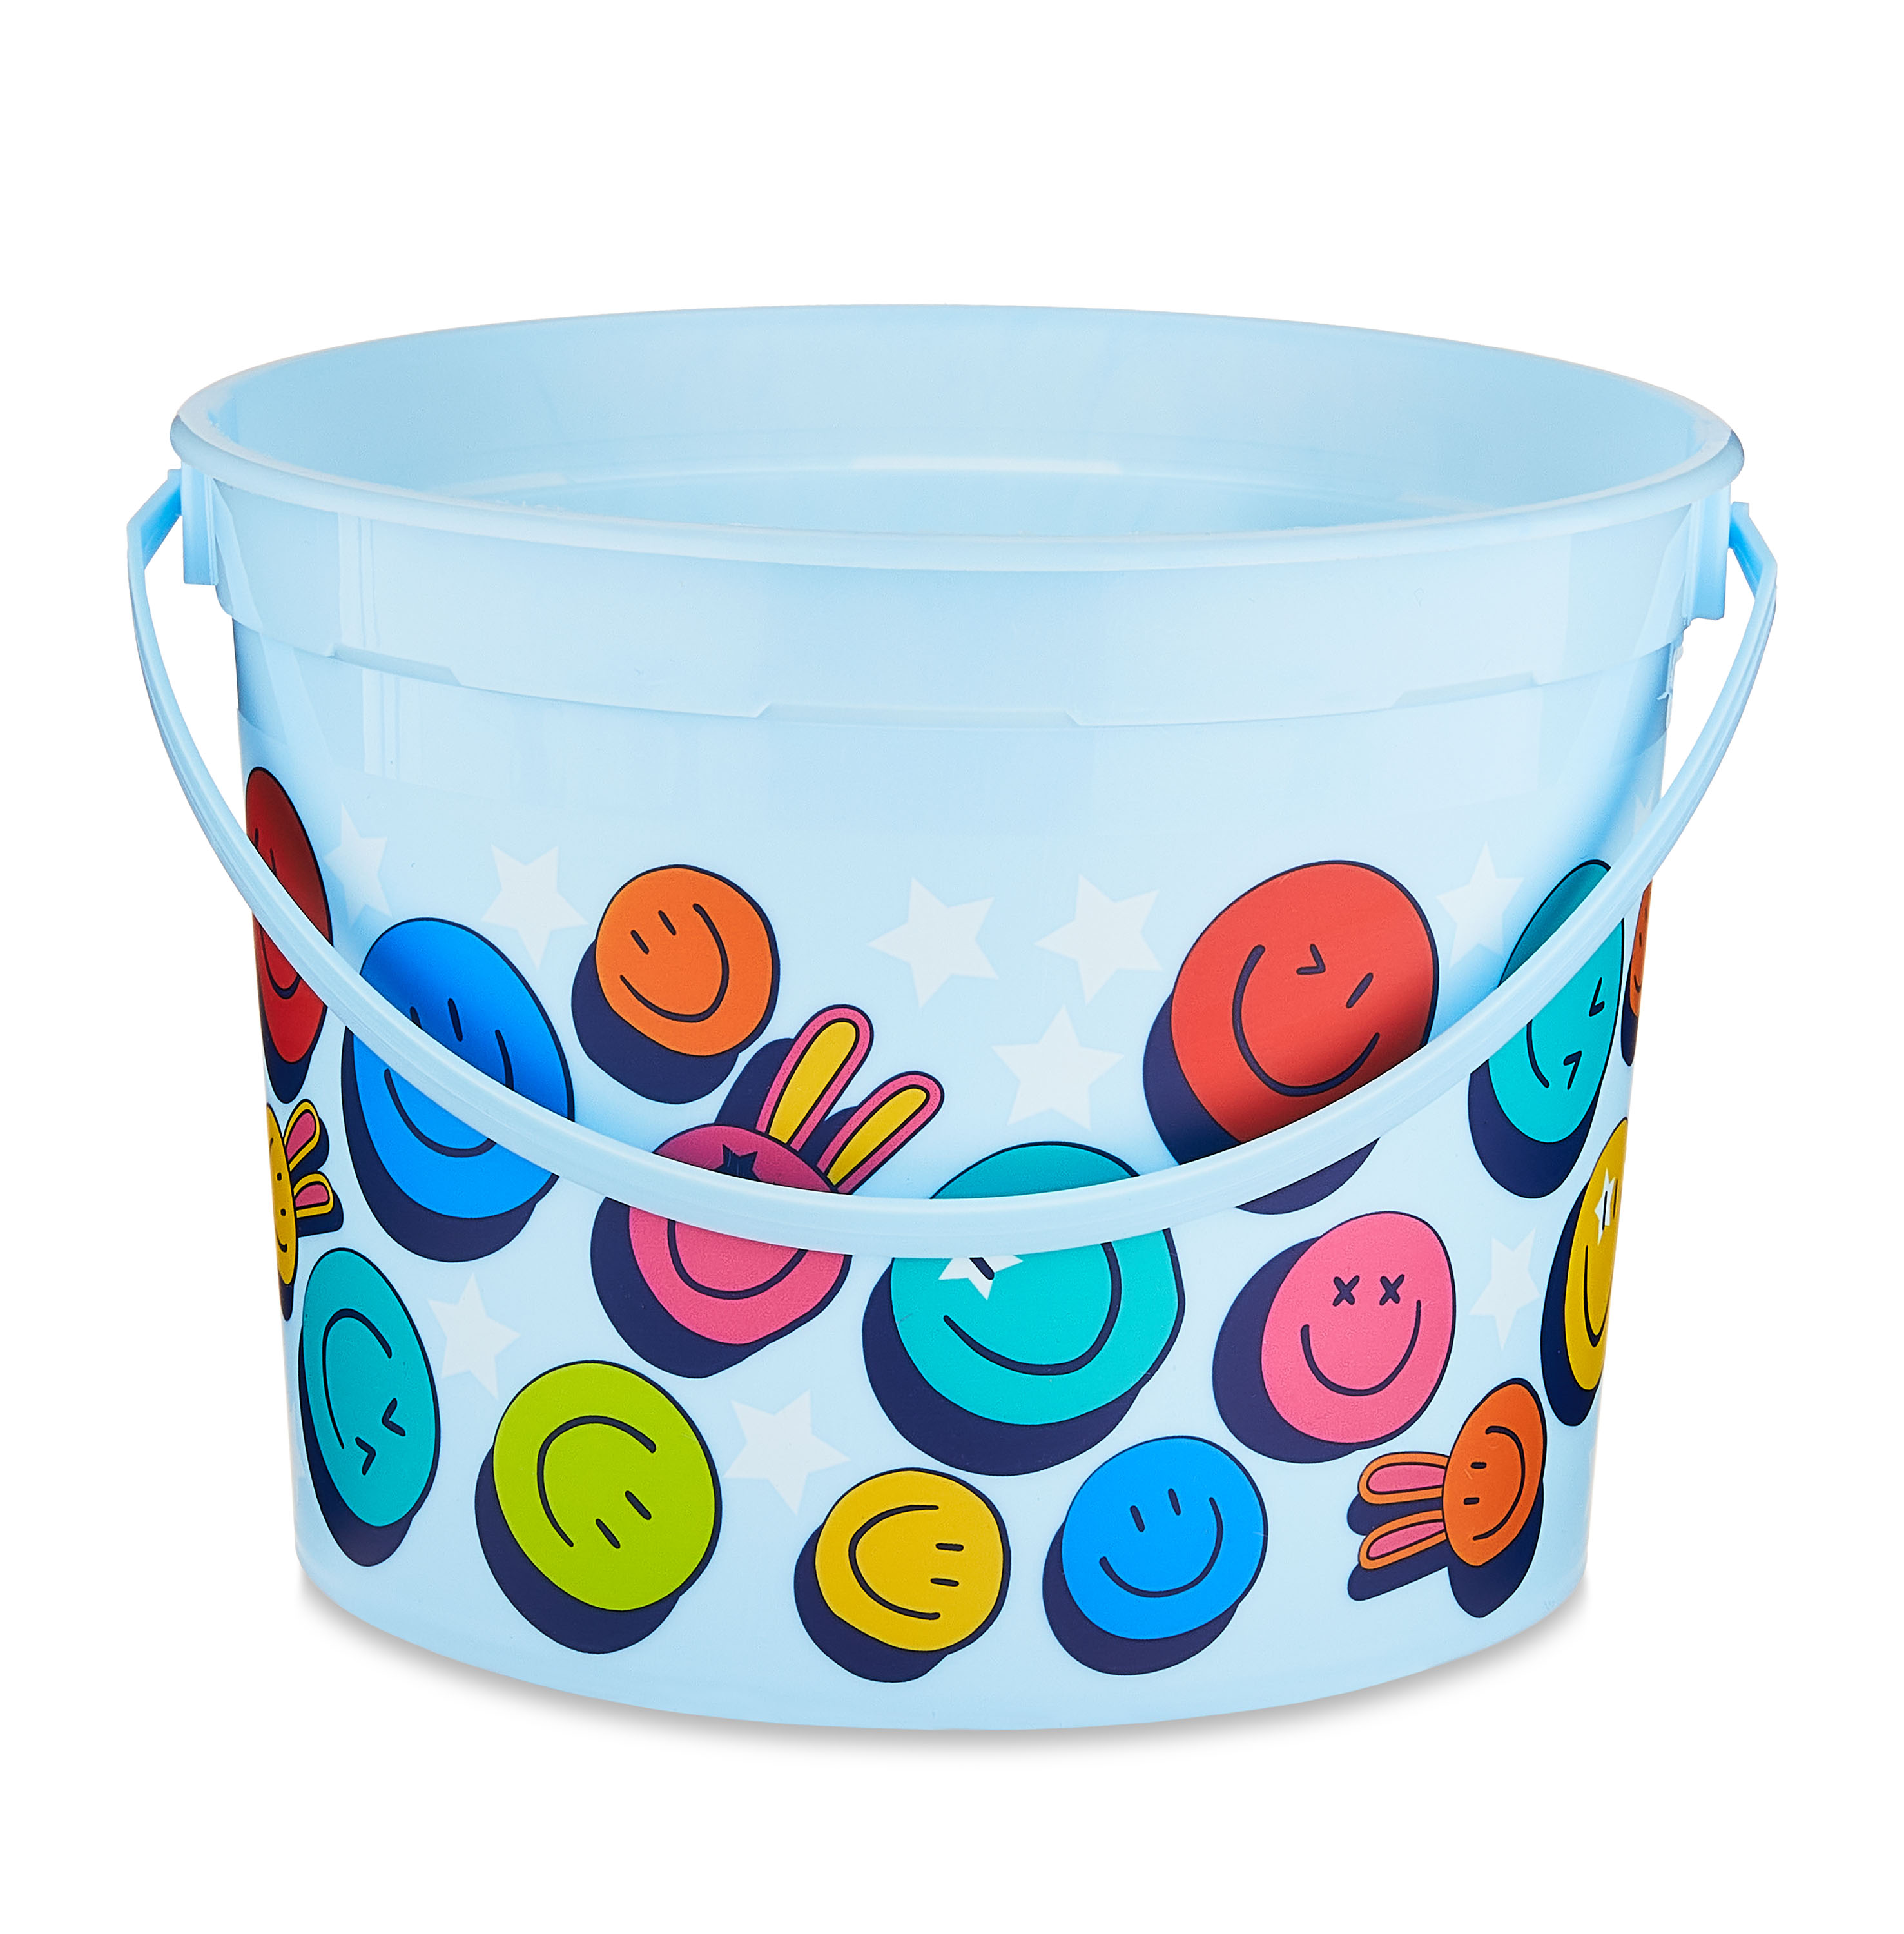 Easter 5-Quart Plastic Bucket, Blue Smileys, by Way To Celebrate - image 1 of 5